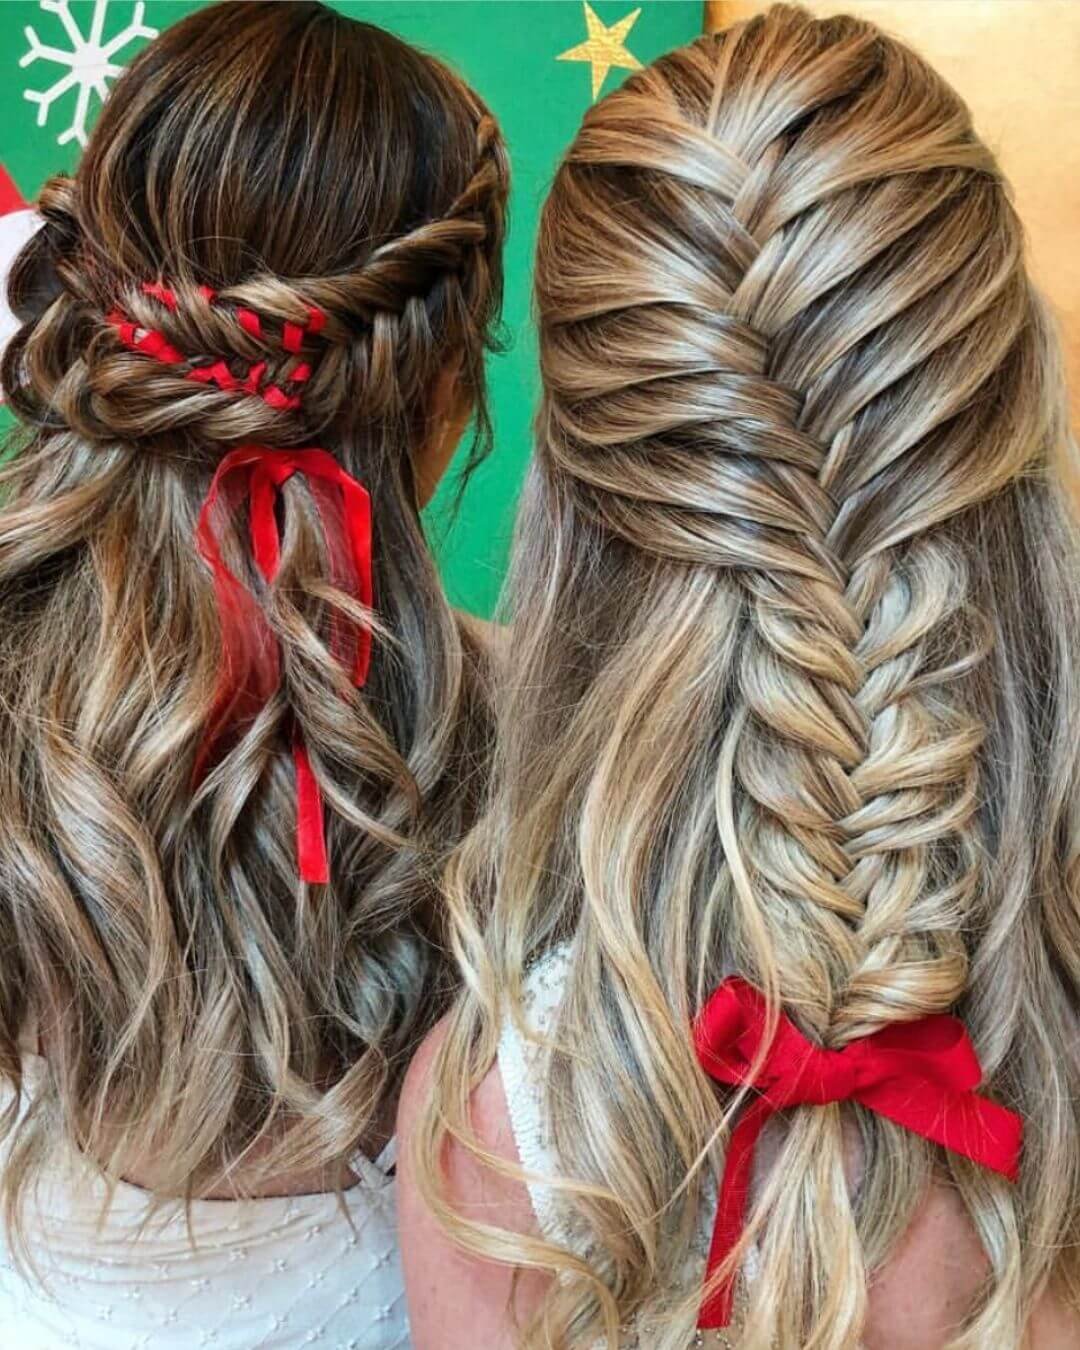 Christmas Inspired Hairstyles and Colors Two Red Bow Hairstyles